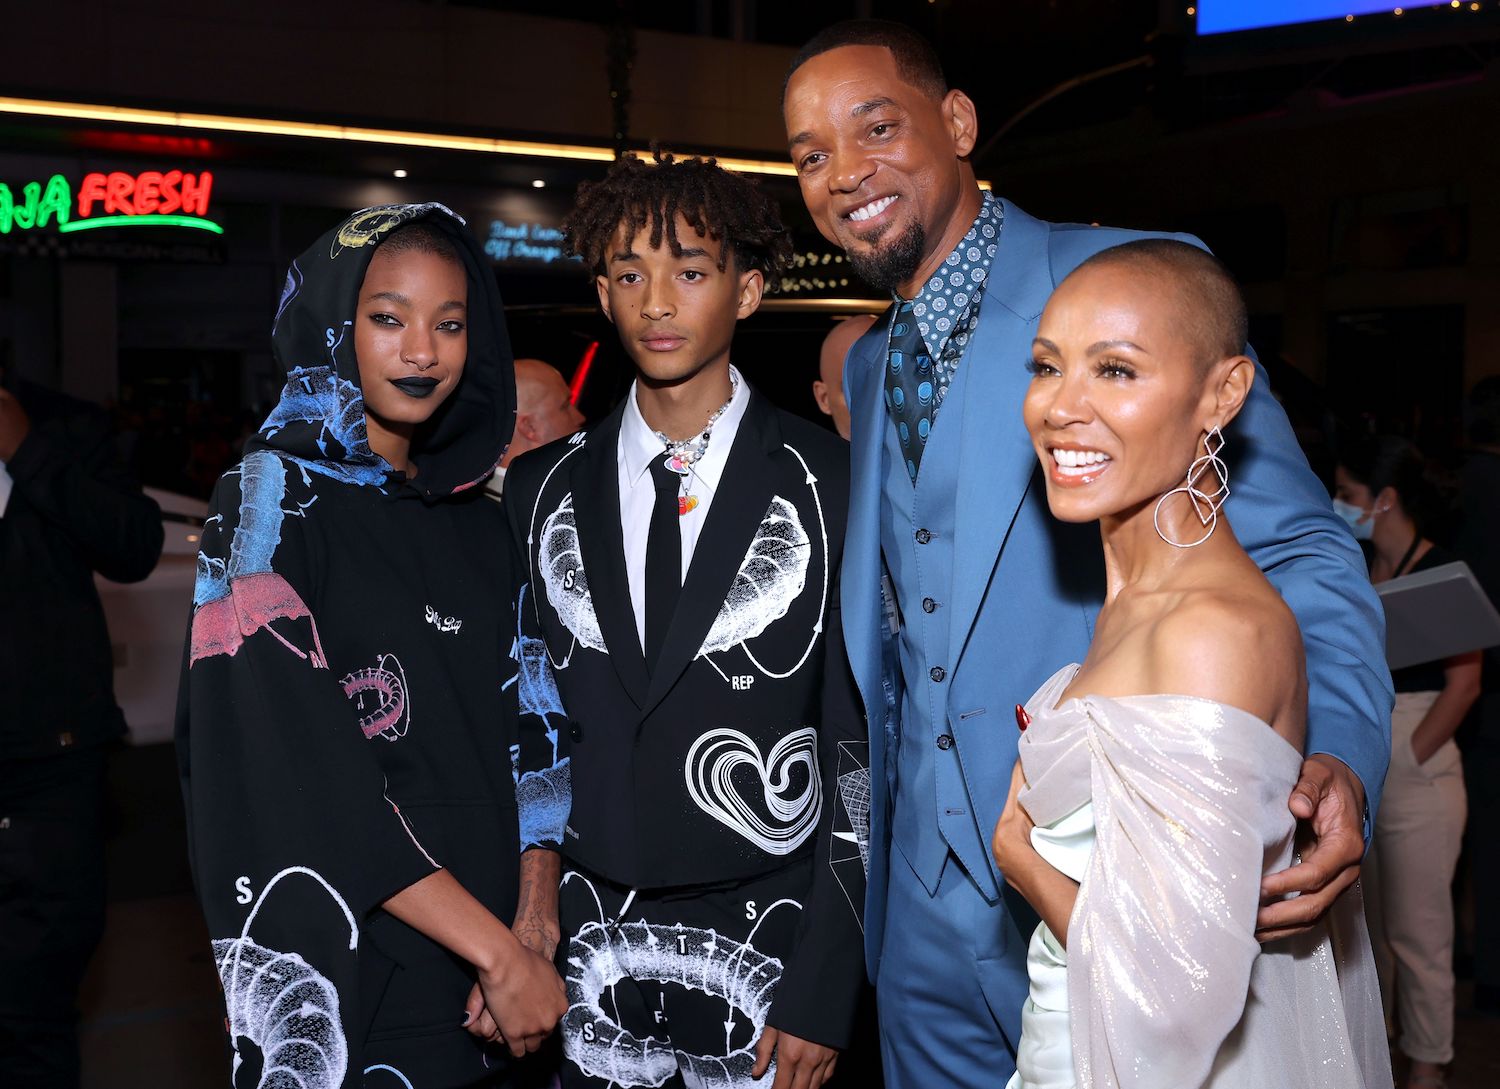 Willow Smith, Jaden Smith, Will Smith, and Jada Pinkett Smith standing together and smiling at an event